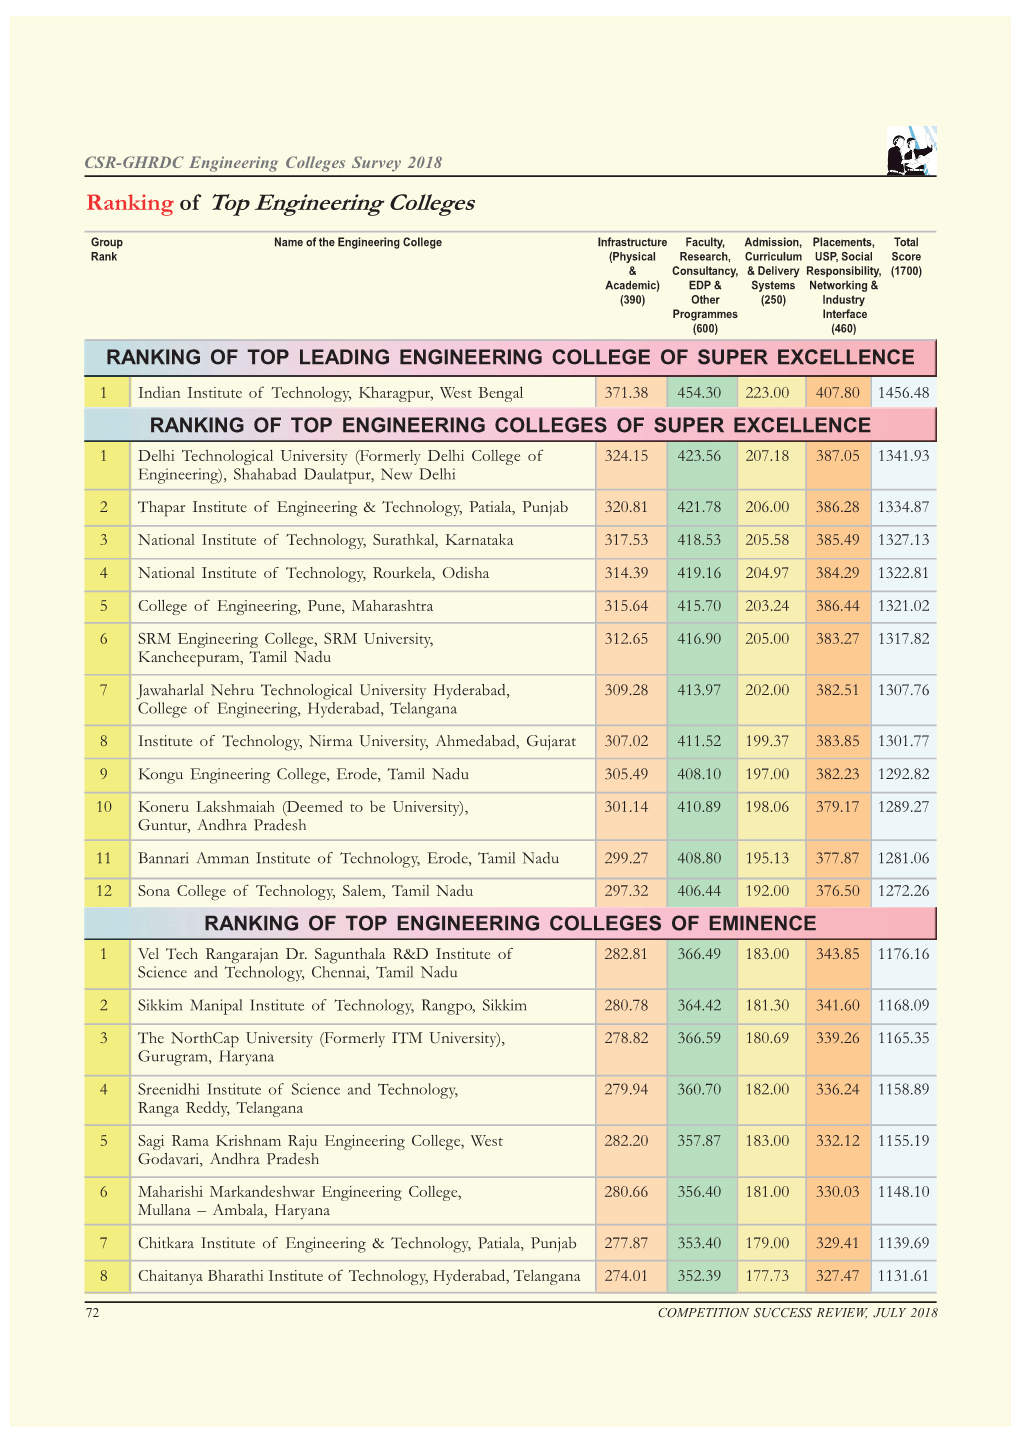 Ranking of Top Engineering Colleges